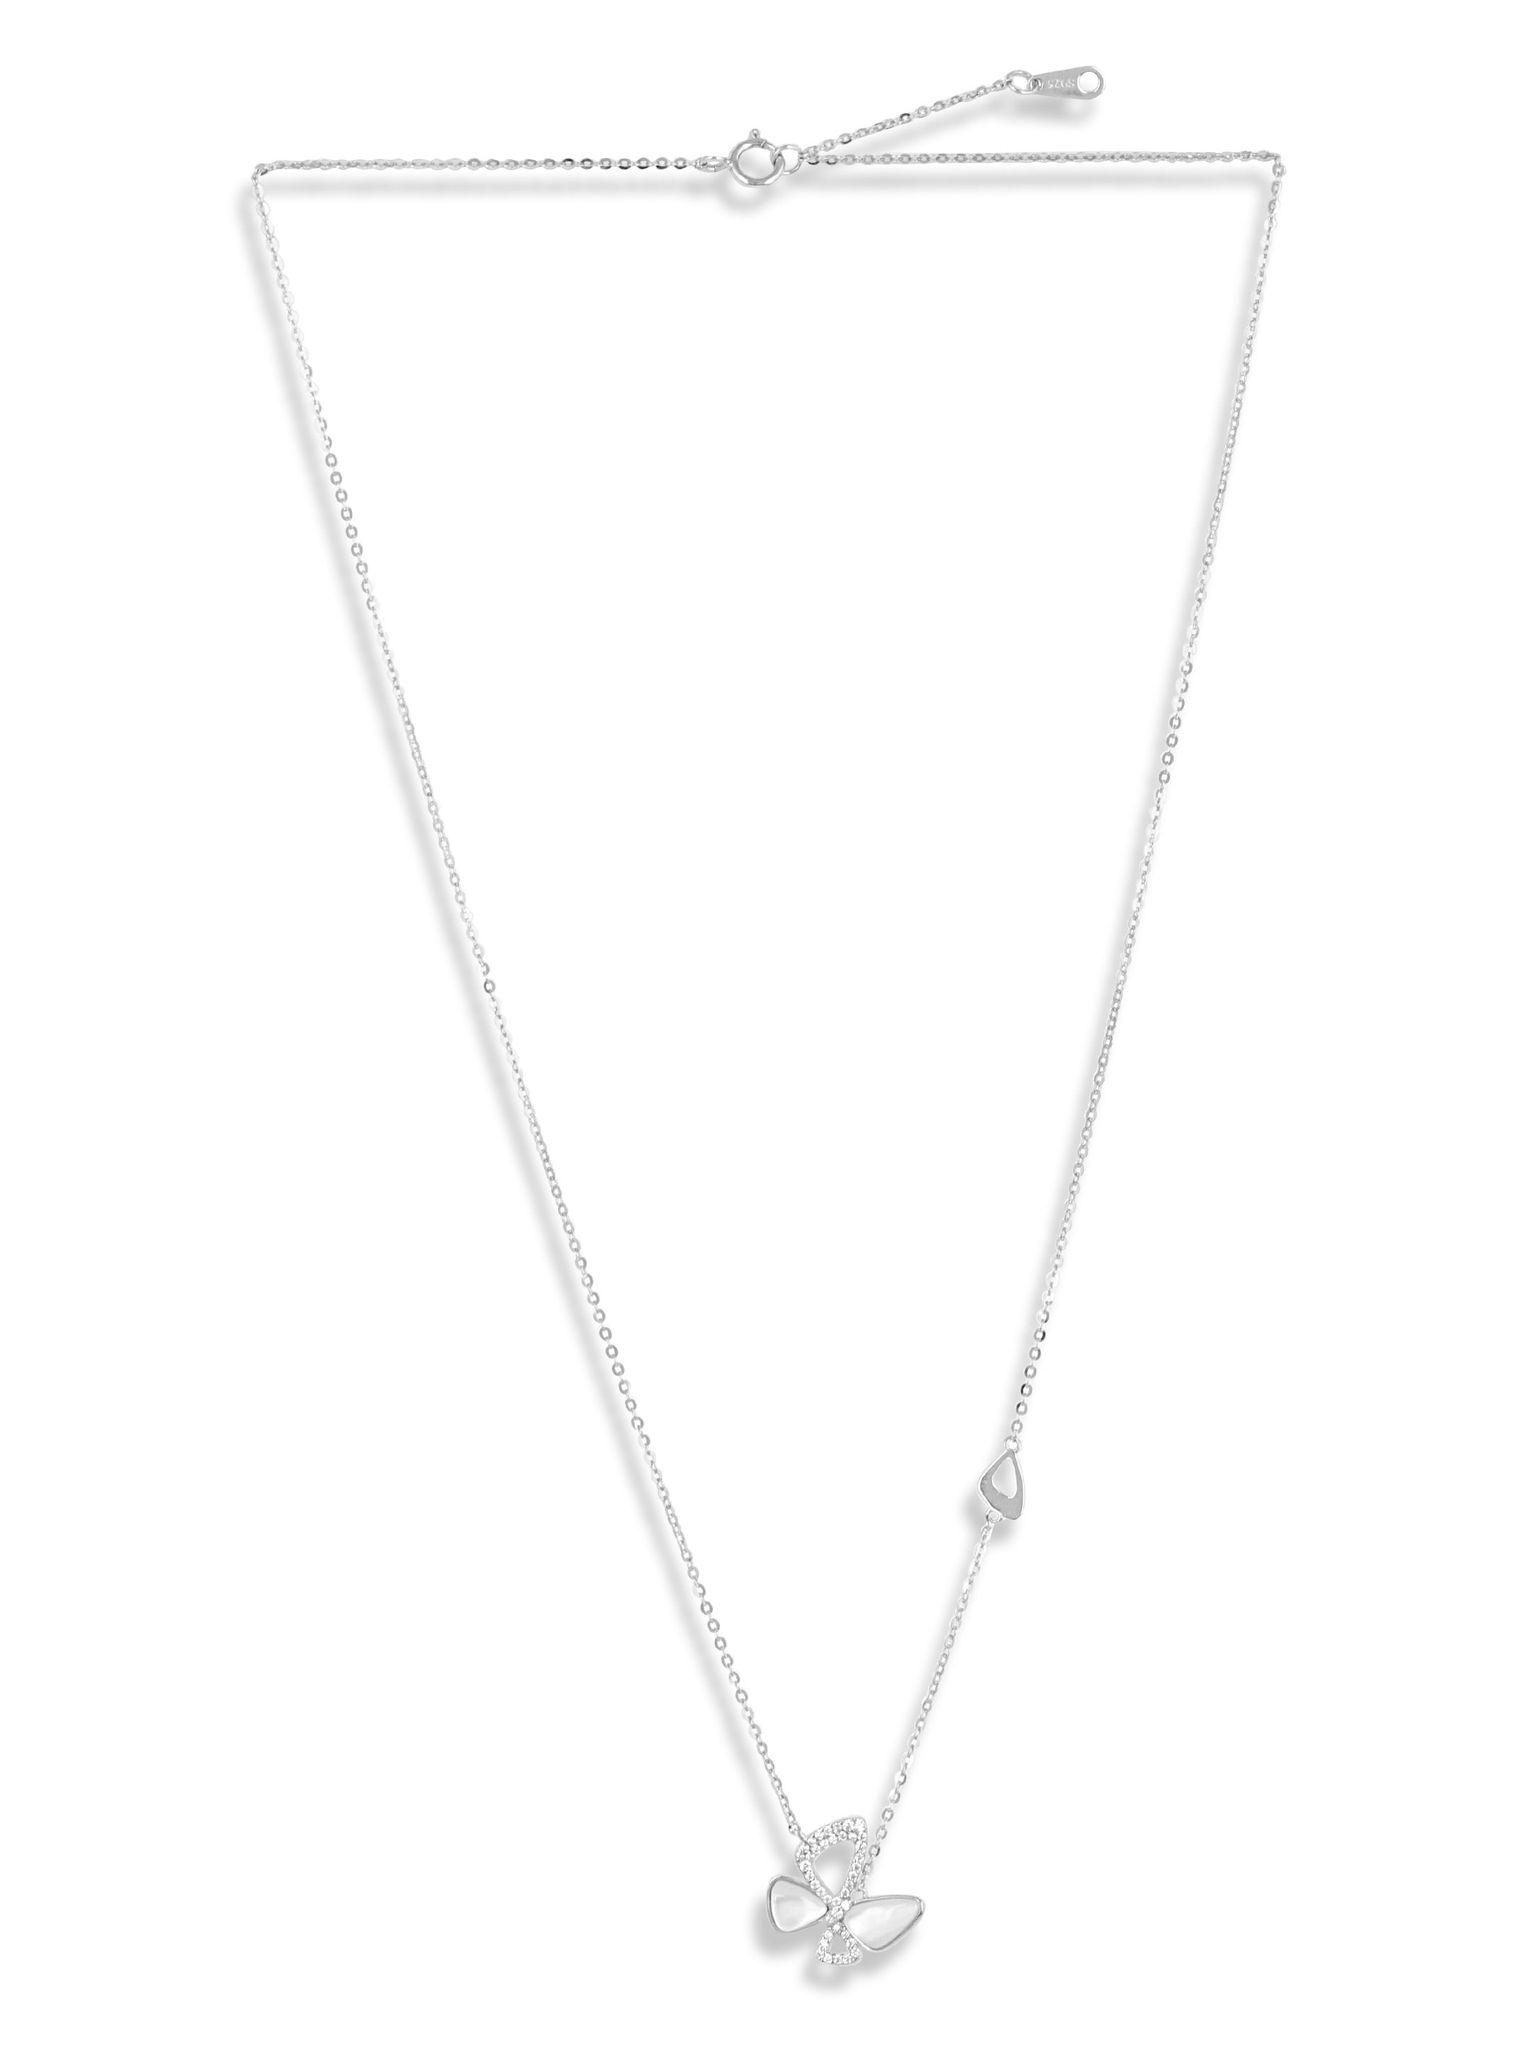 Cat Eye butterfly pendant with chain White Gold